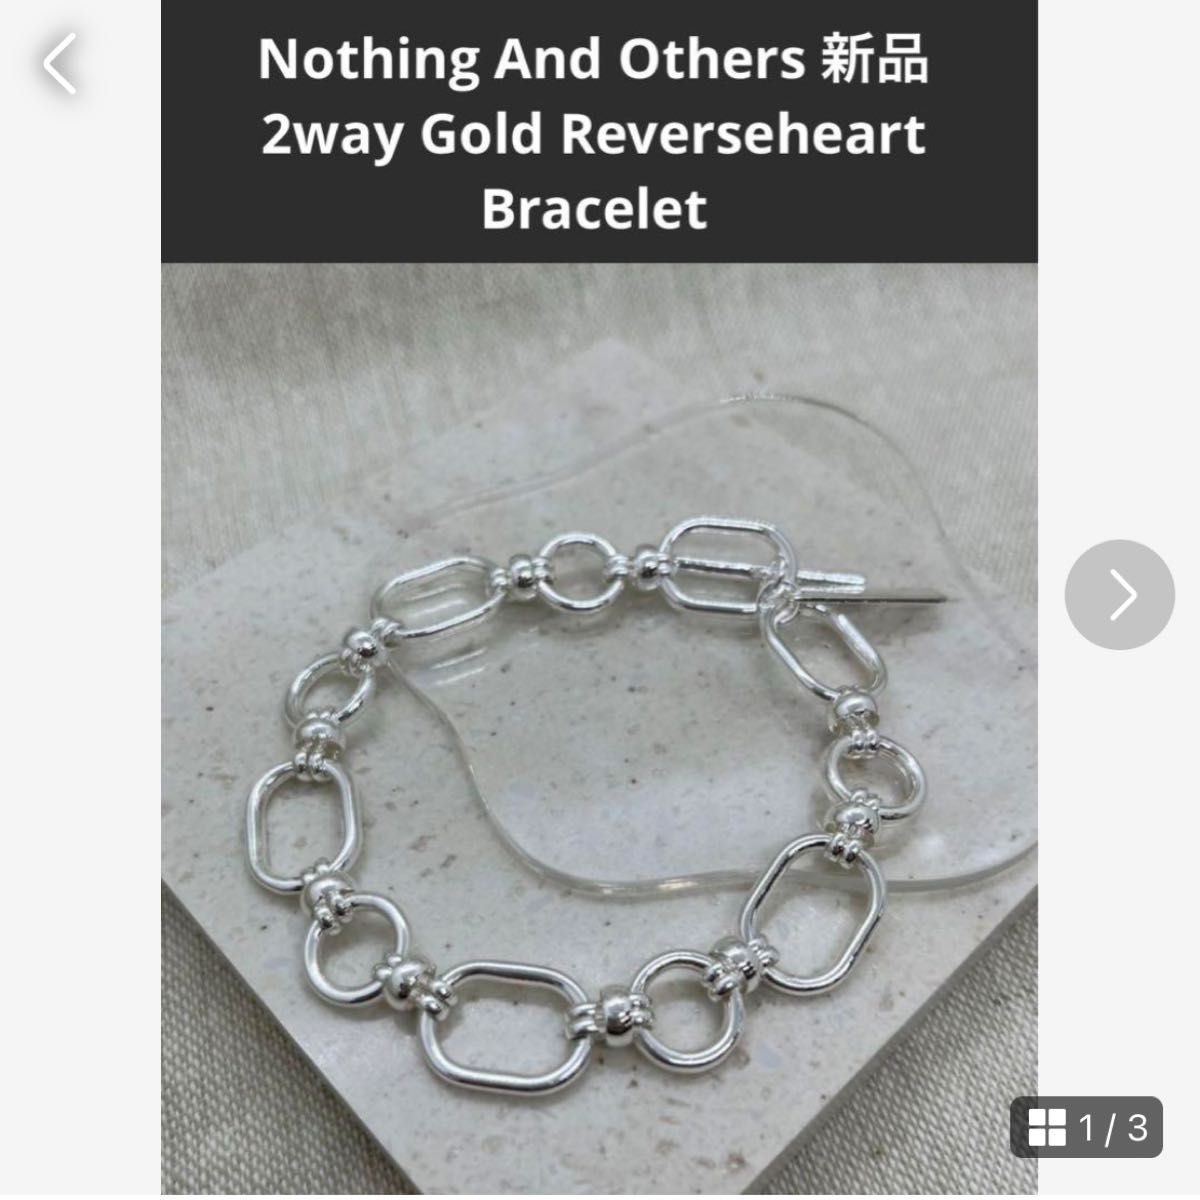 Nothing And Others 新品タグ付き　2way バイカラーブレスレット　シルバー925